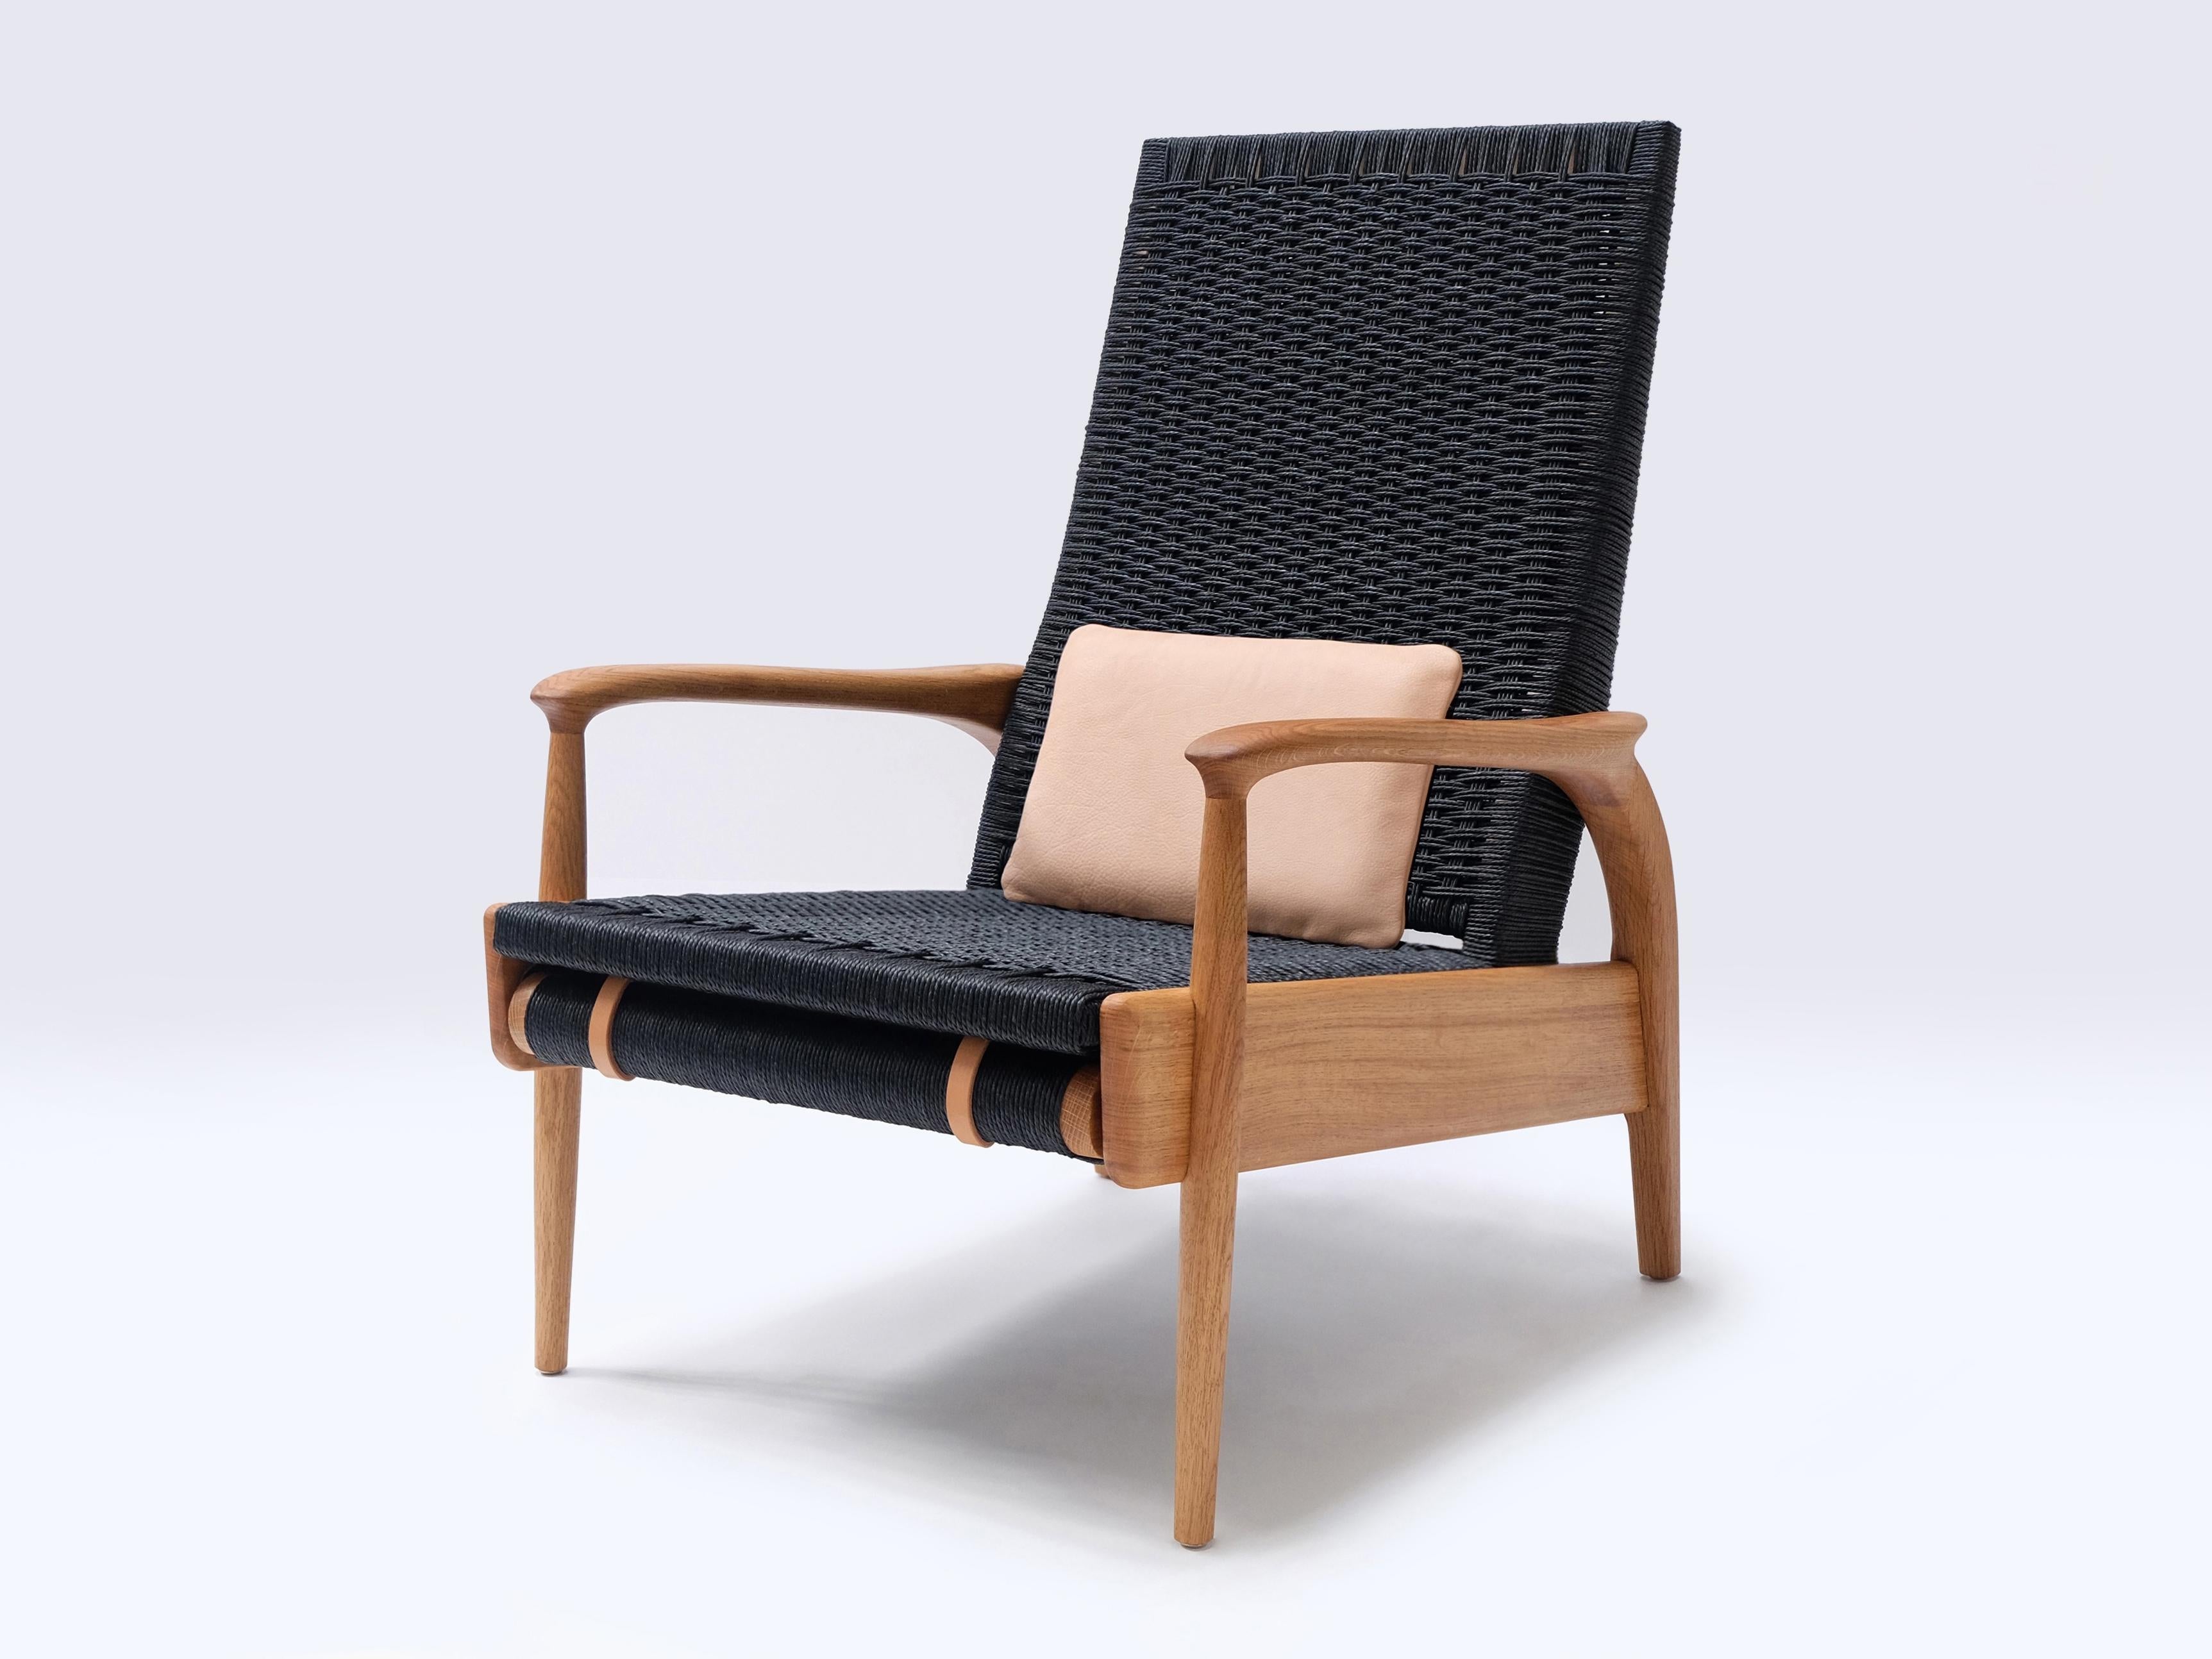 Hand-Woven Custom-Made Lounge Chair in Solid Oak& Black Danish Cord with Leather Cushions For Sale